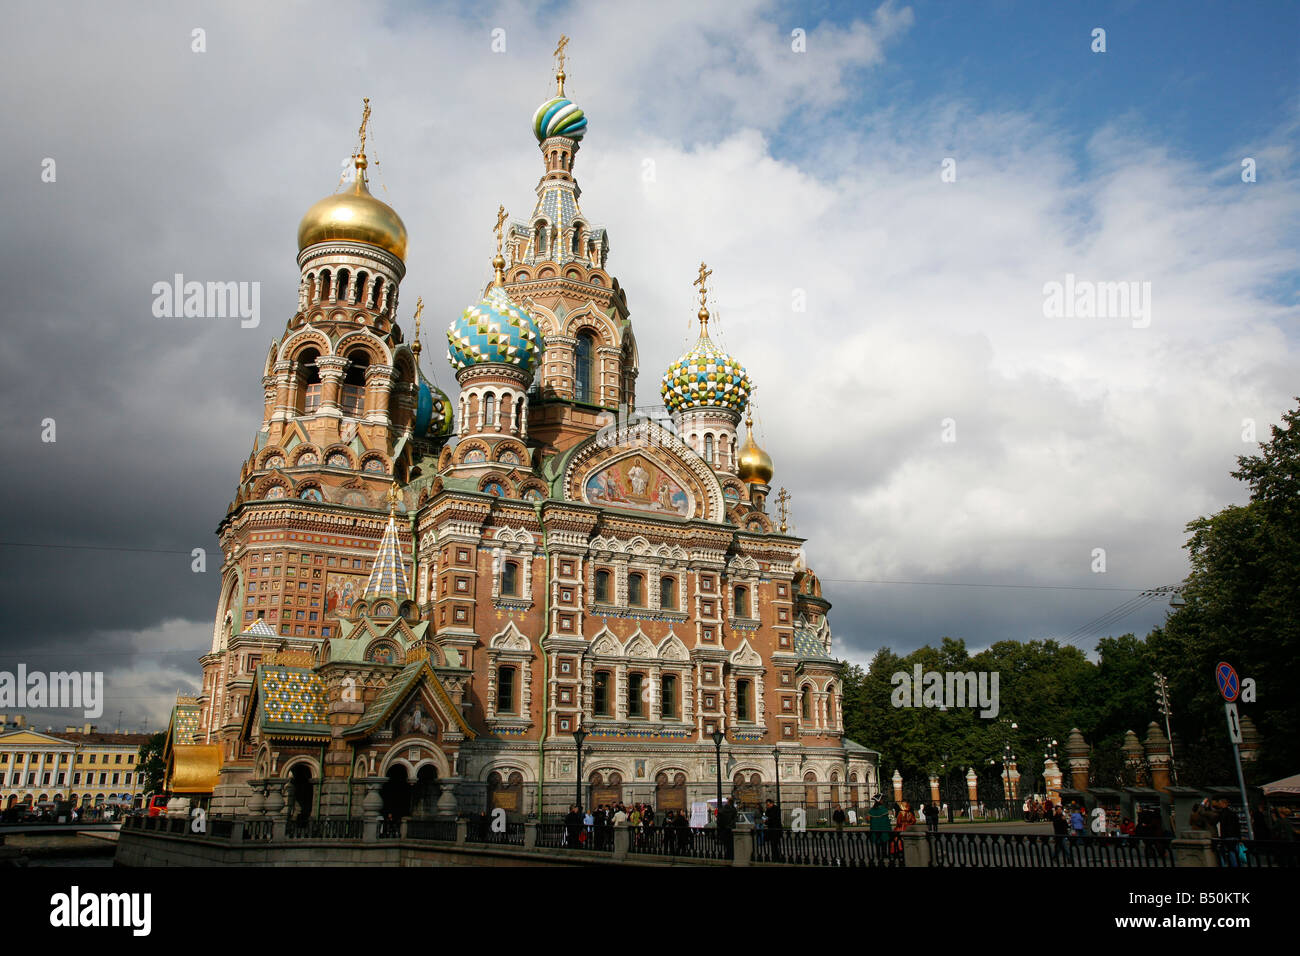 Aug 2008 - The Church on Spilled blood St Petersburg Russia Stock Photo